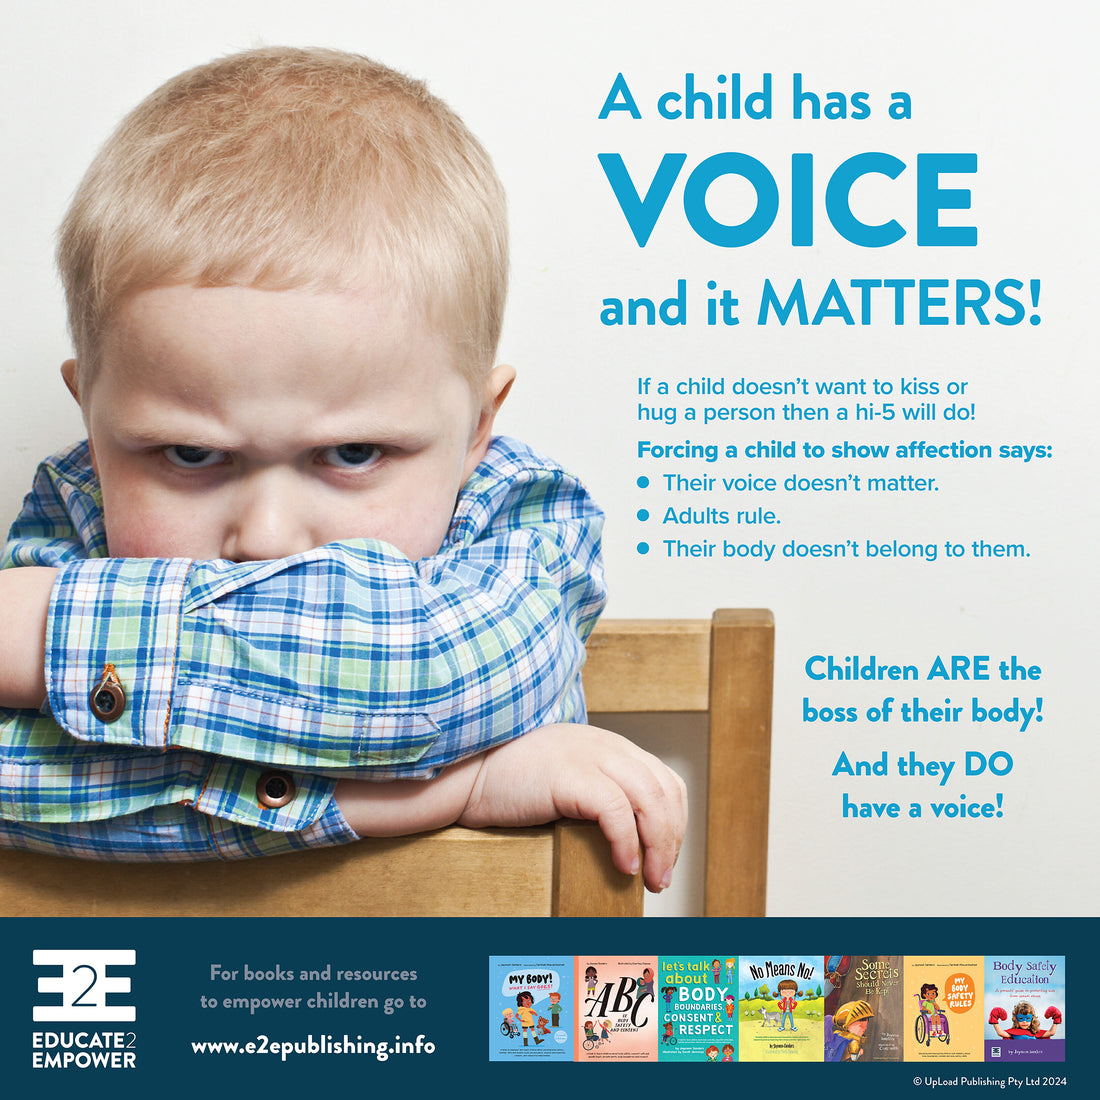 A child has a VOICE and it MATTERS!